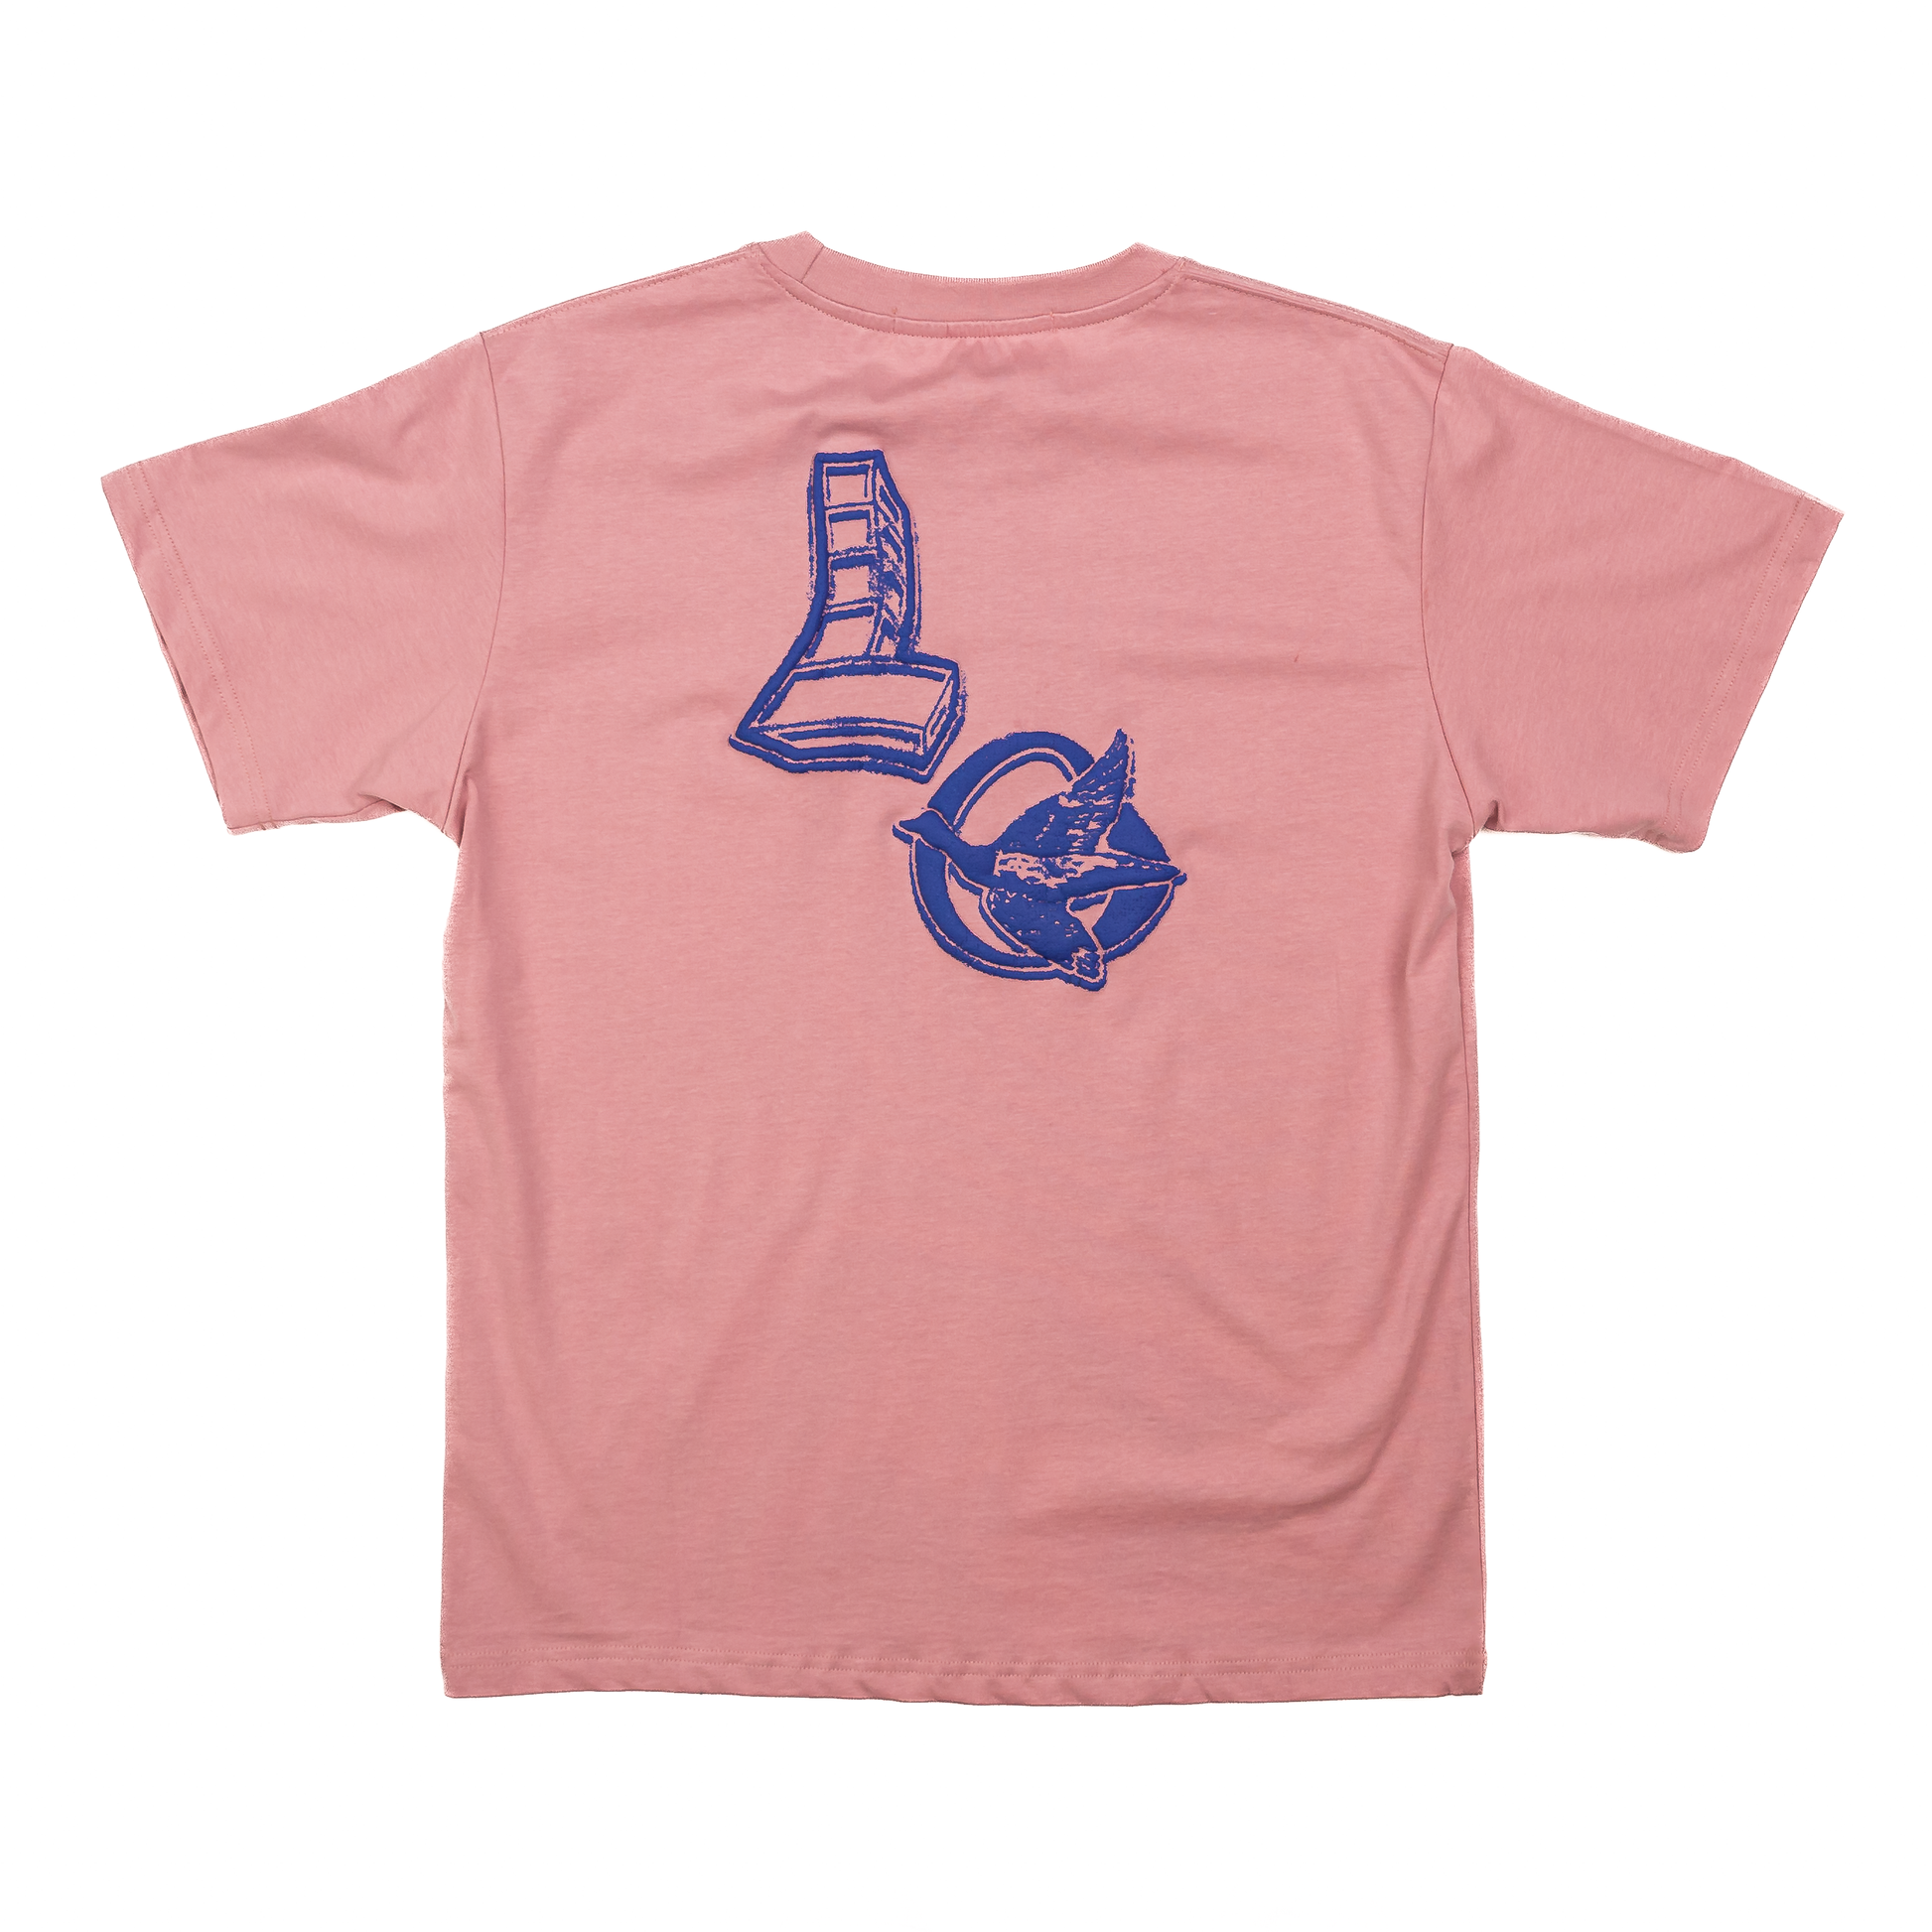 Tee, New Official – Puff Layr Washed LO Pink